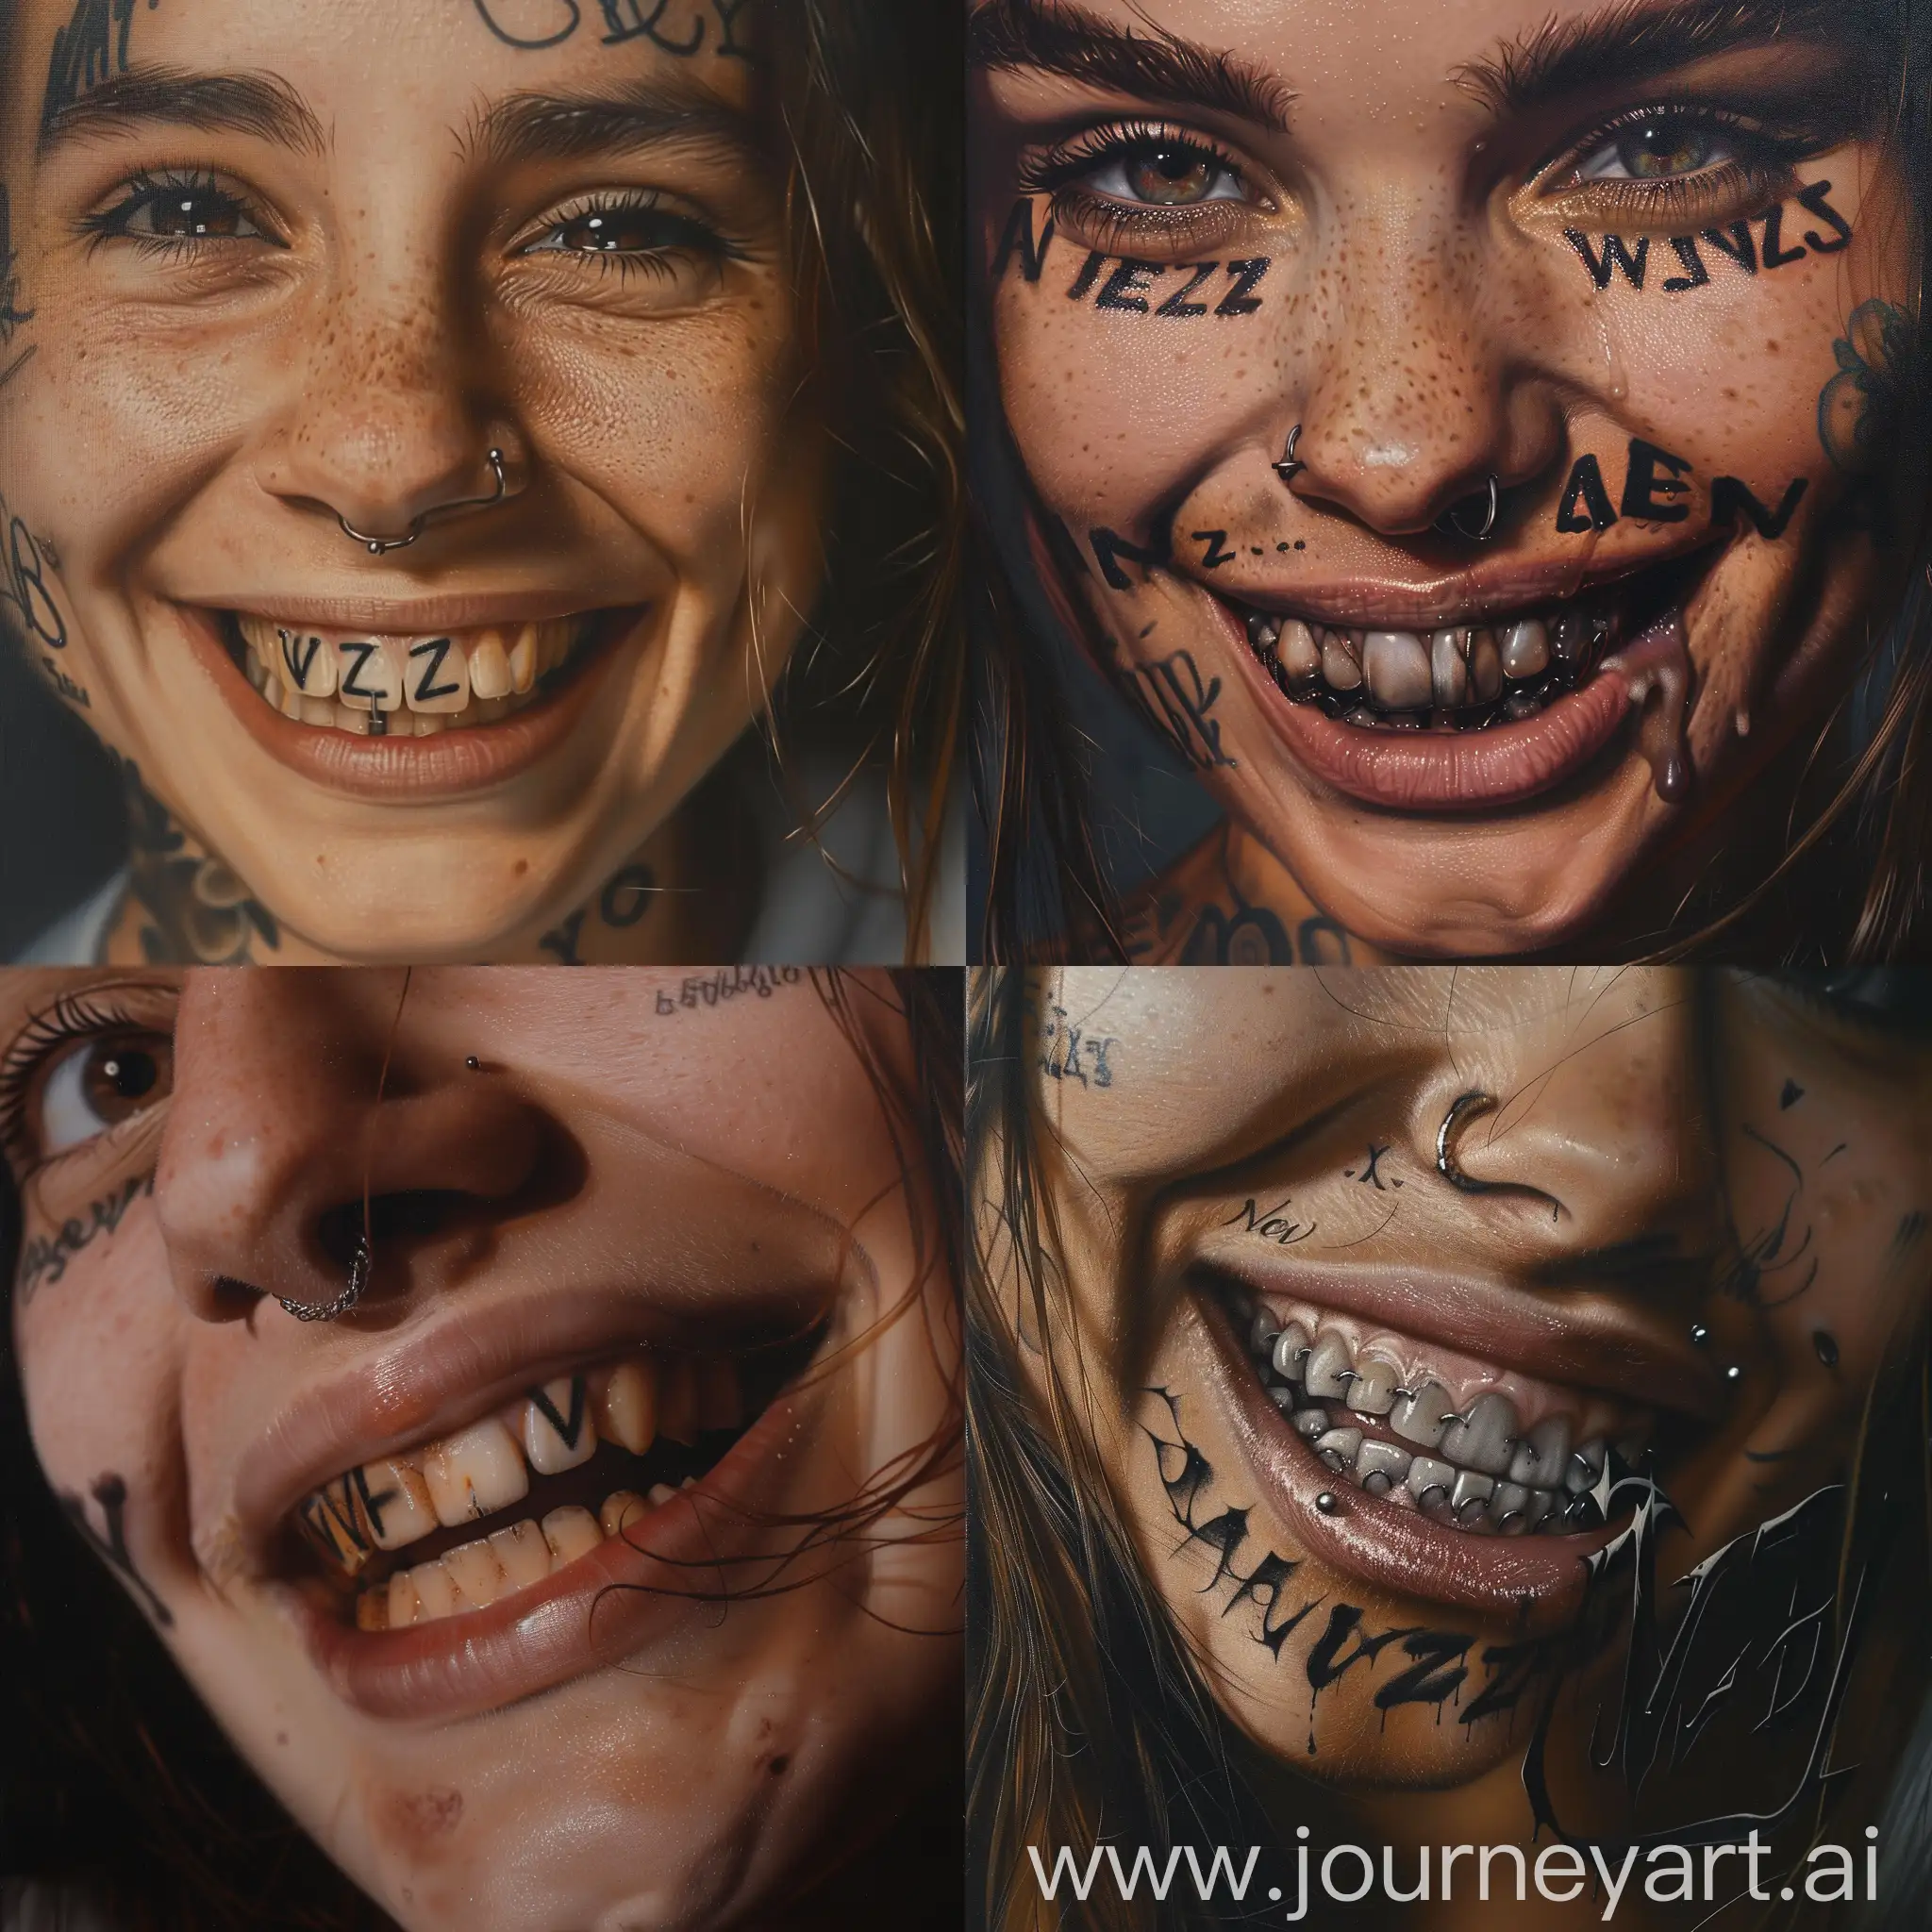 Girl-Smiling-with-Facial-Tattoo-NevZ-in-Photorealistic-CloseUp